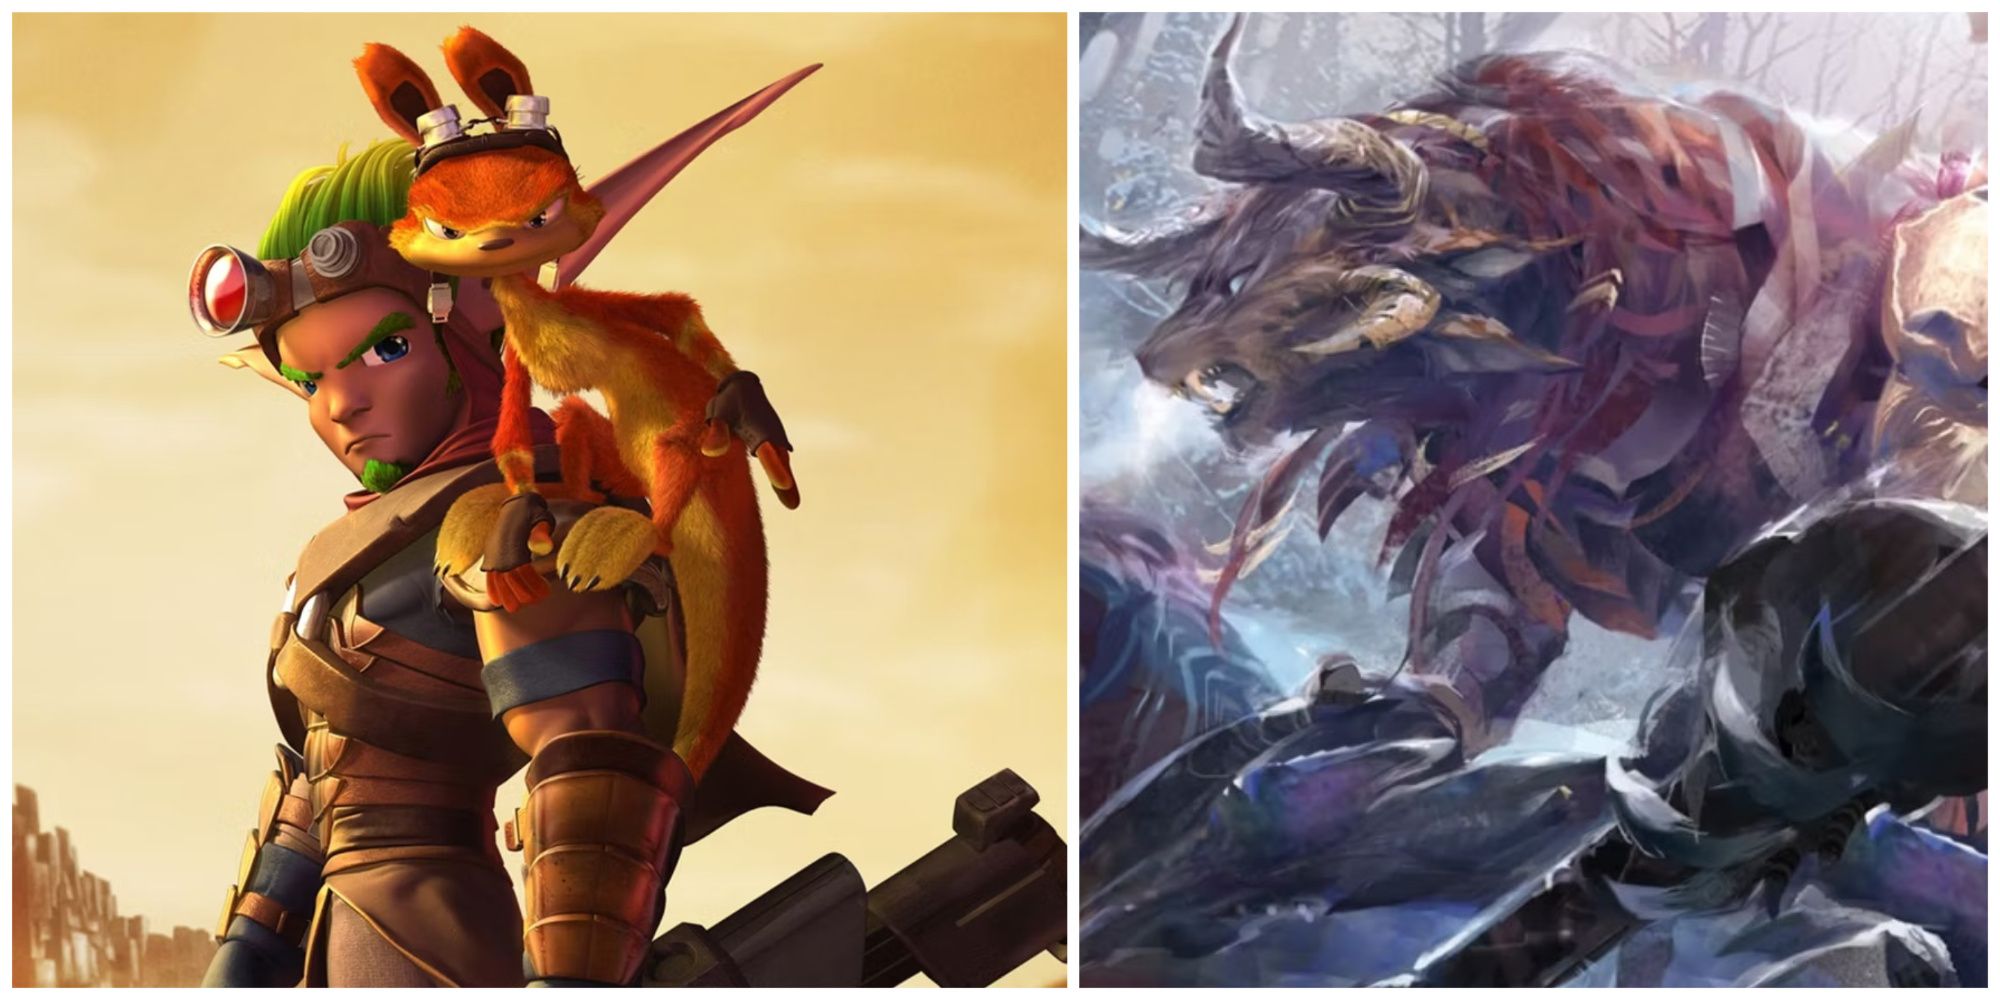 jak and daxter in the desert and the charr rox from guild wars 2